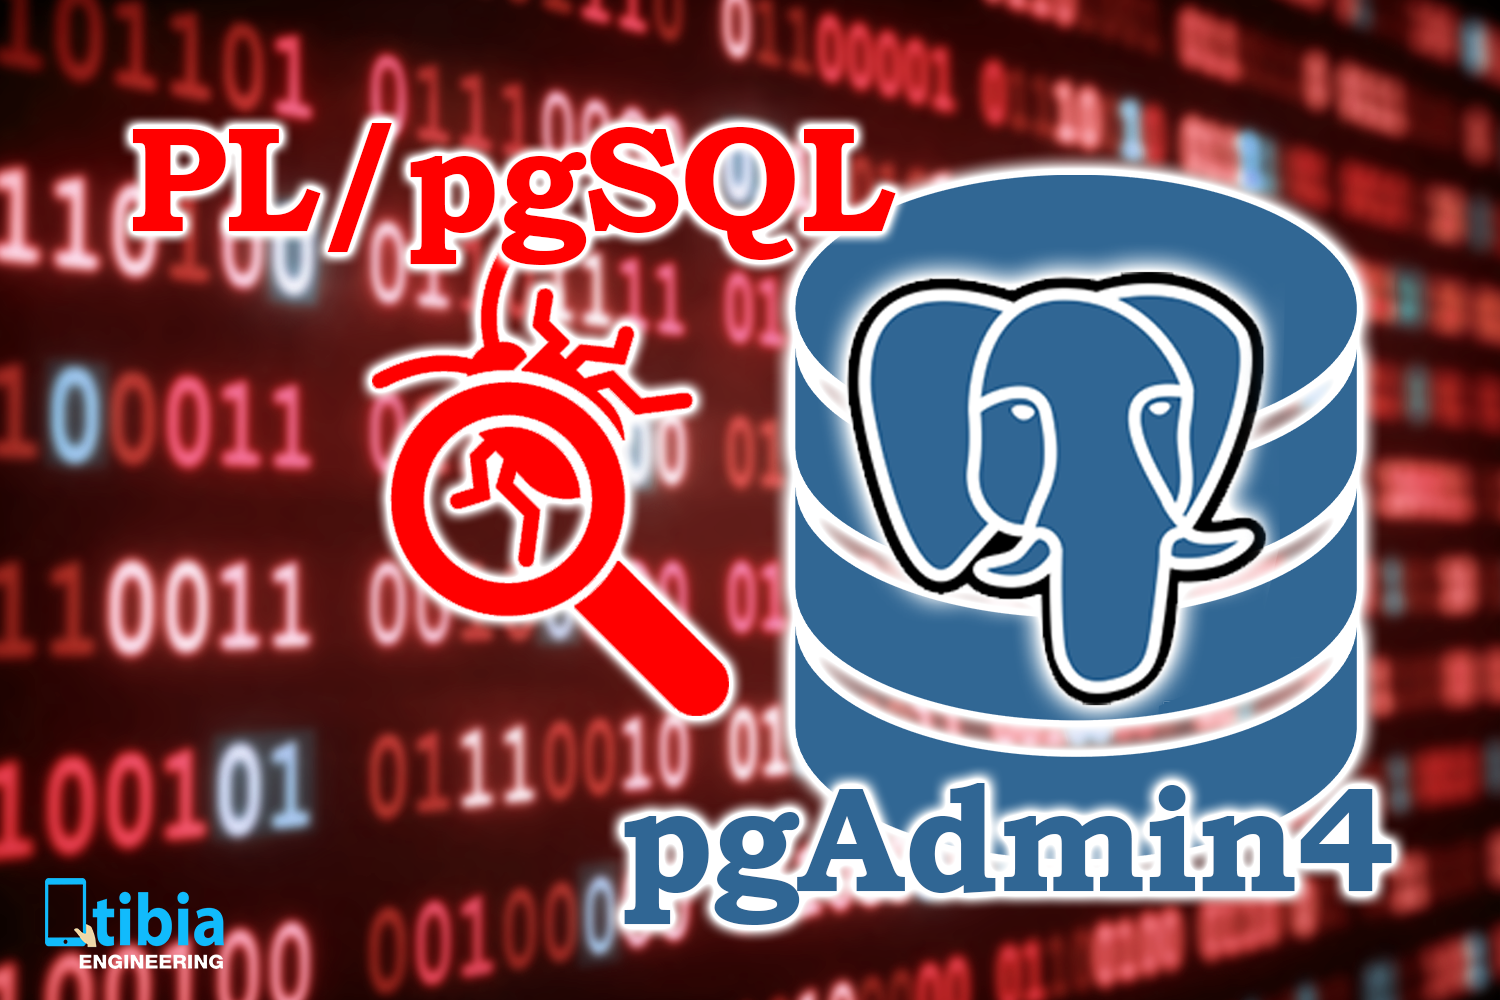 How to install the PL/PGSQL debugger and use it in PgAdmin